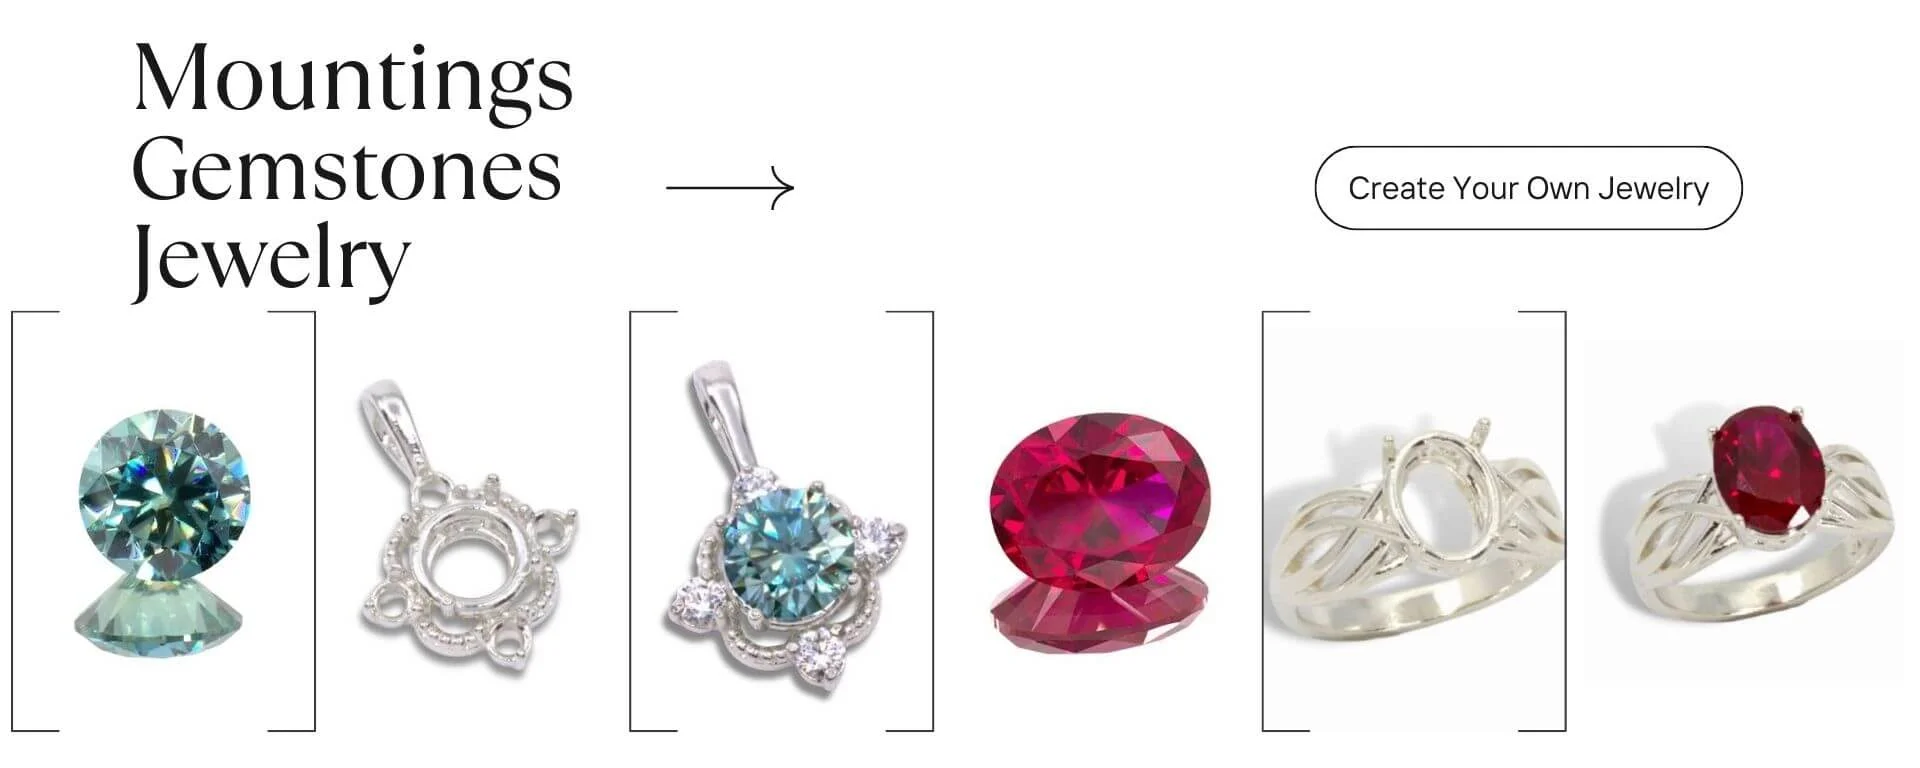 Jamming Gems - Create your own jewelry